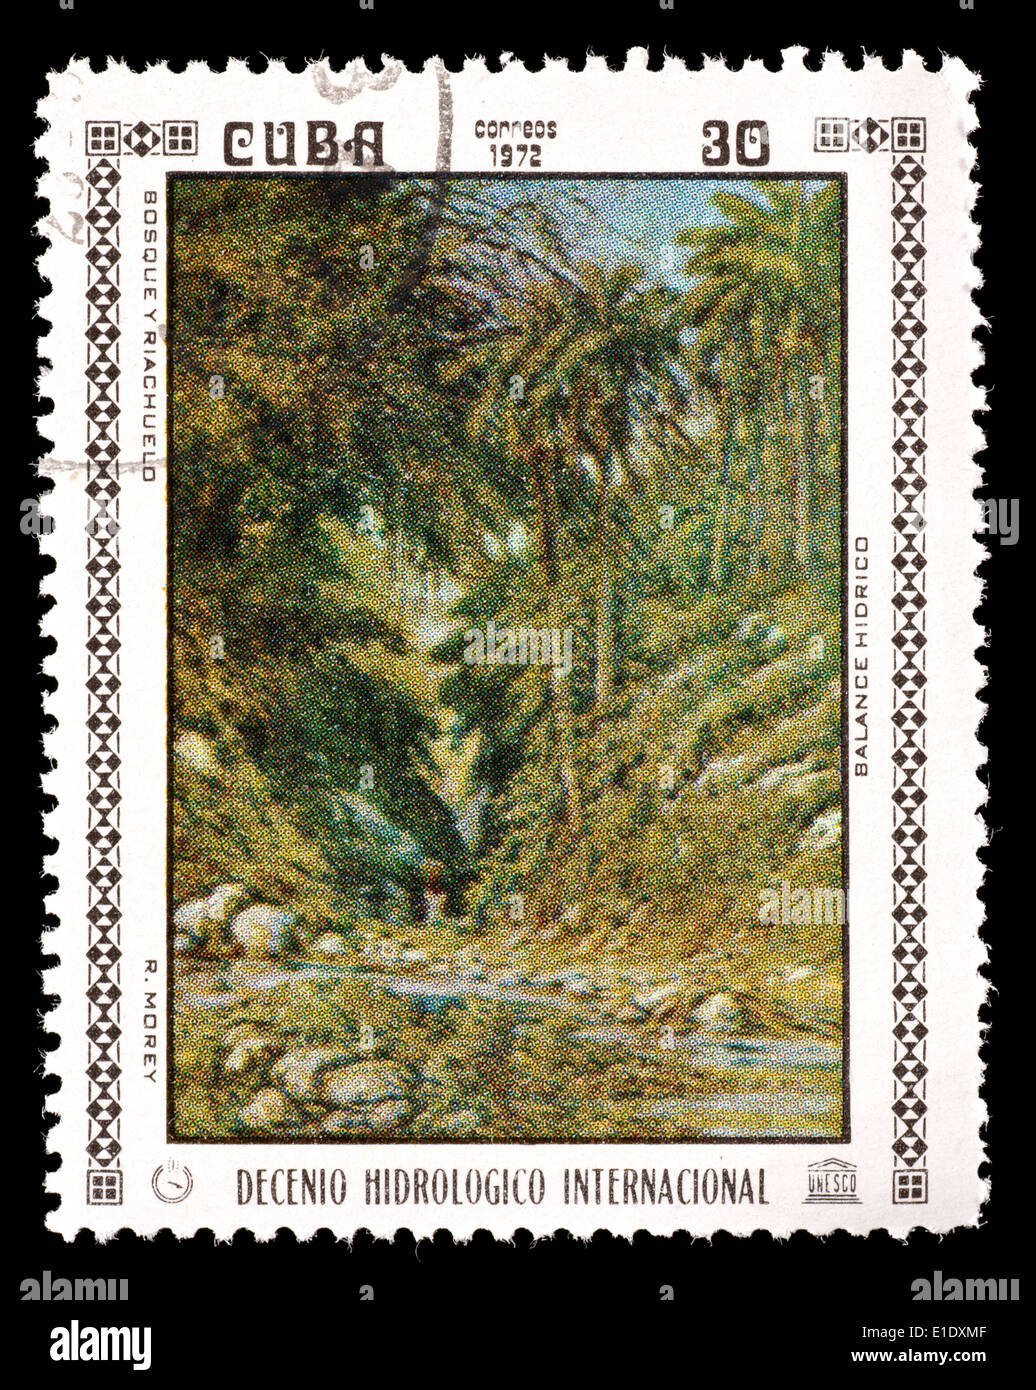 Postage stamp from Cuba depicting an  Antonia R. Morley painting ' Forest and Brook', for International Hydrological Decade. Stock Photo